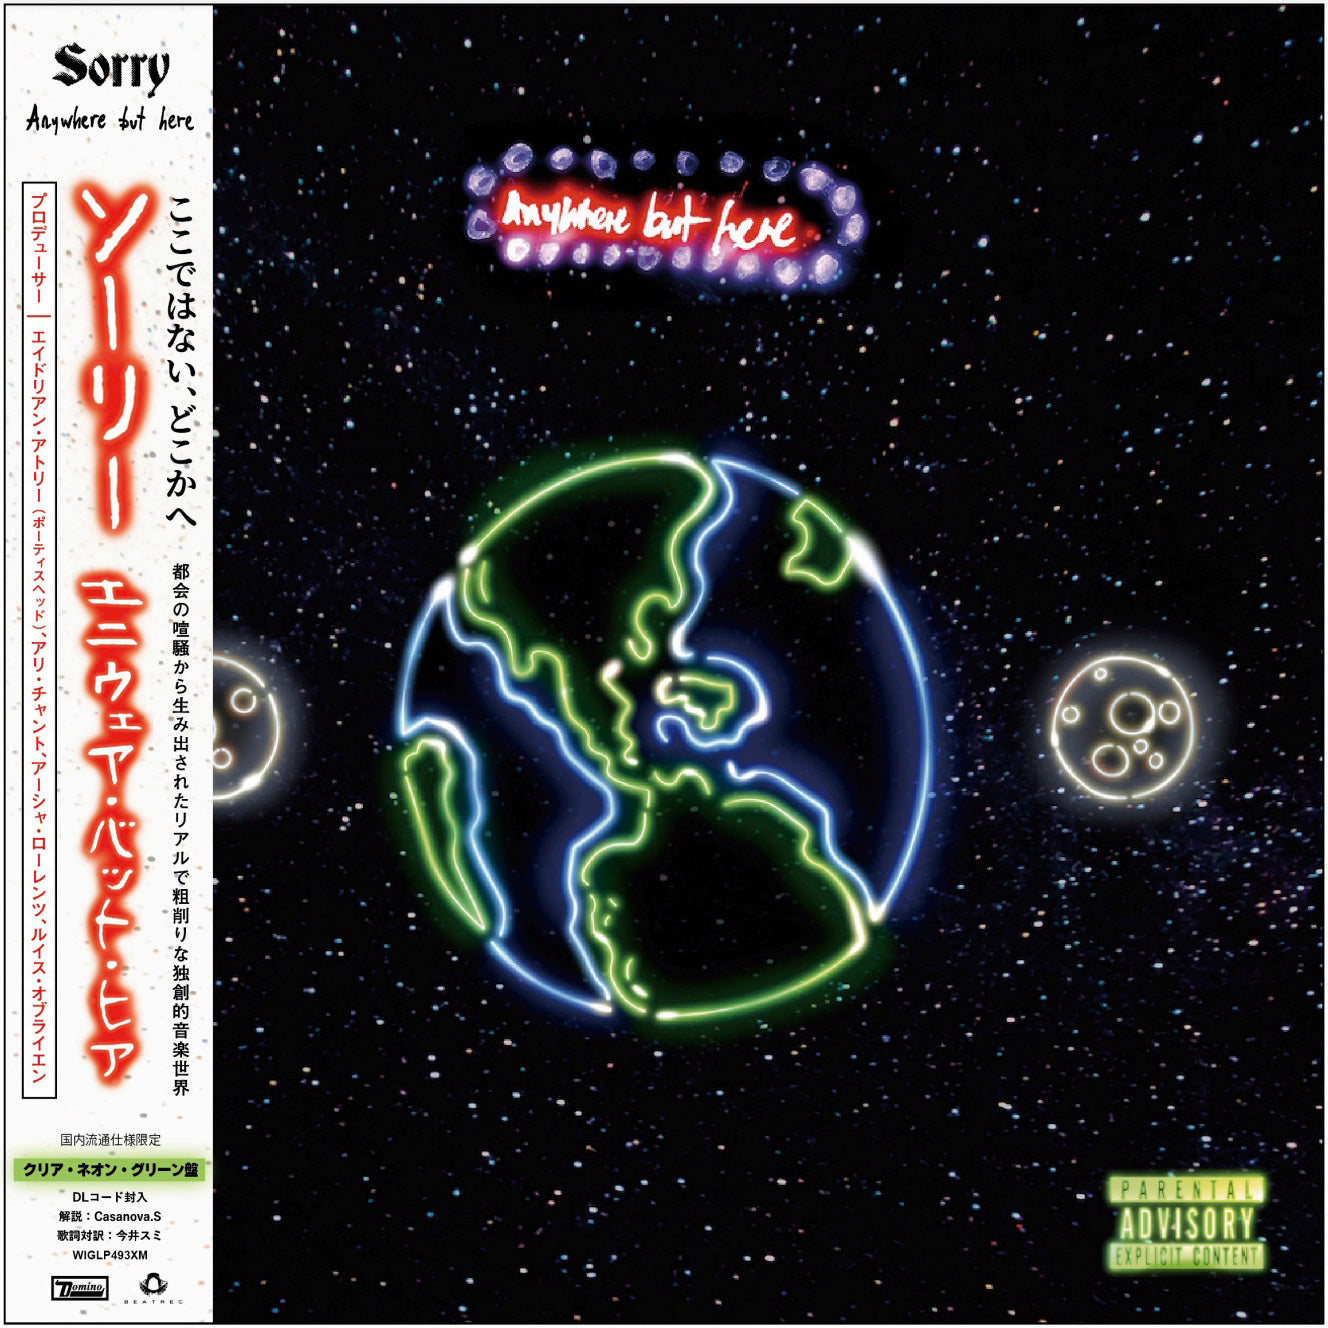 SORRY 'ANYWHERE BUT HERE -LTD. JAPAN EDITION-